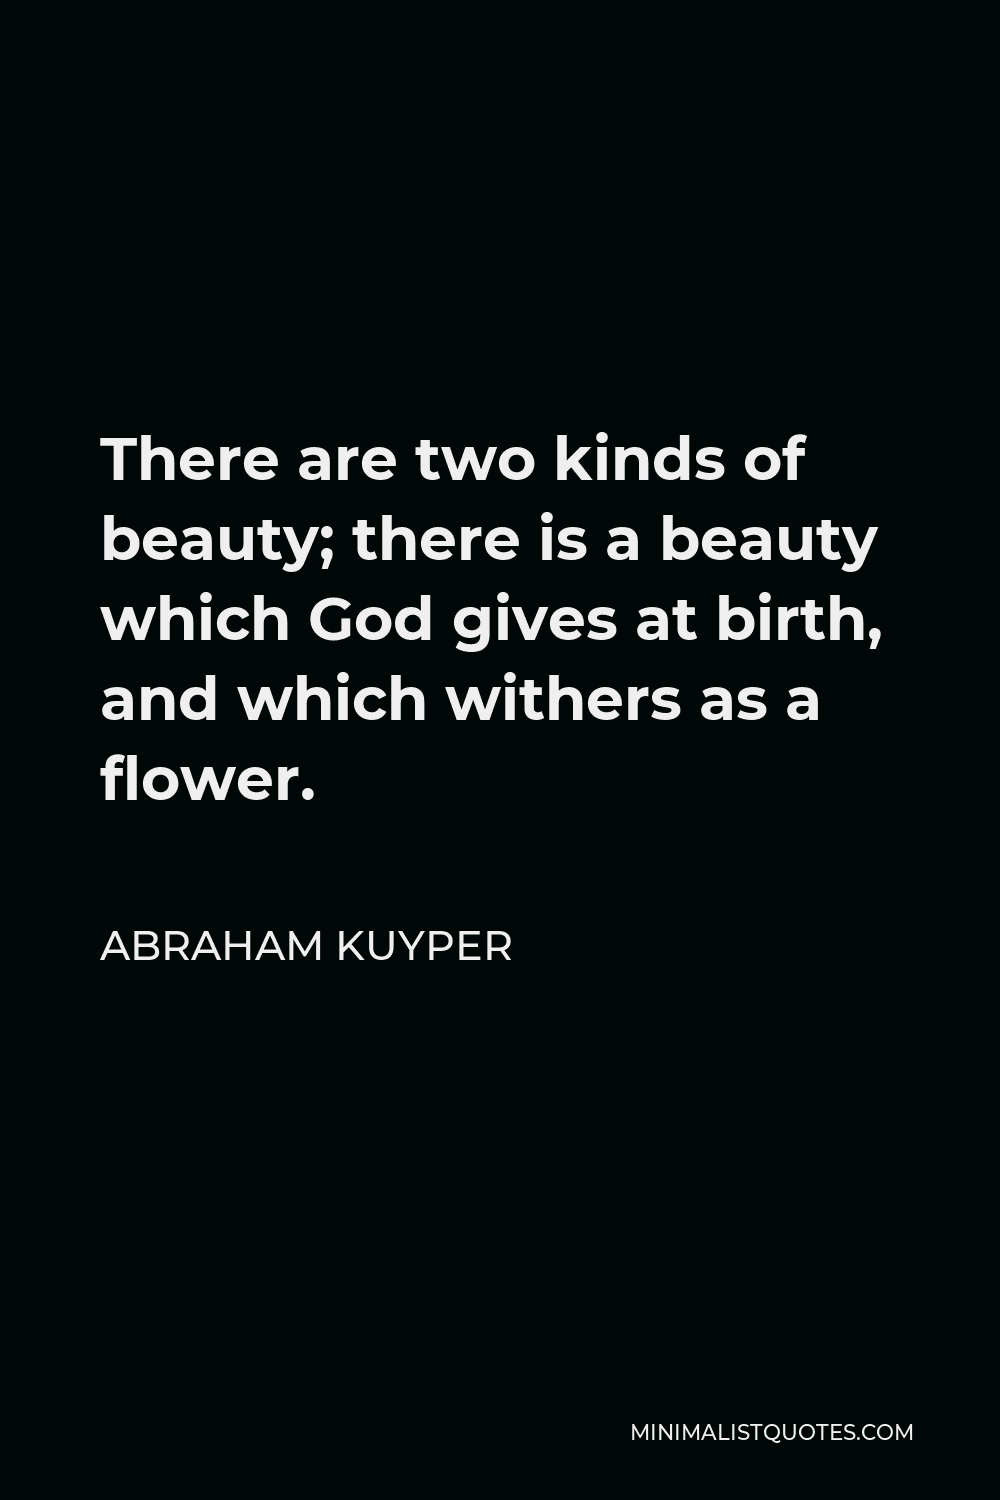 Abraham Kuyper Quote - There are two kinds of beauty; there is a beauty which God gives at birth, and which withers as a flower.